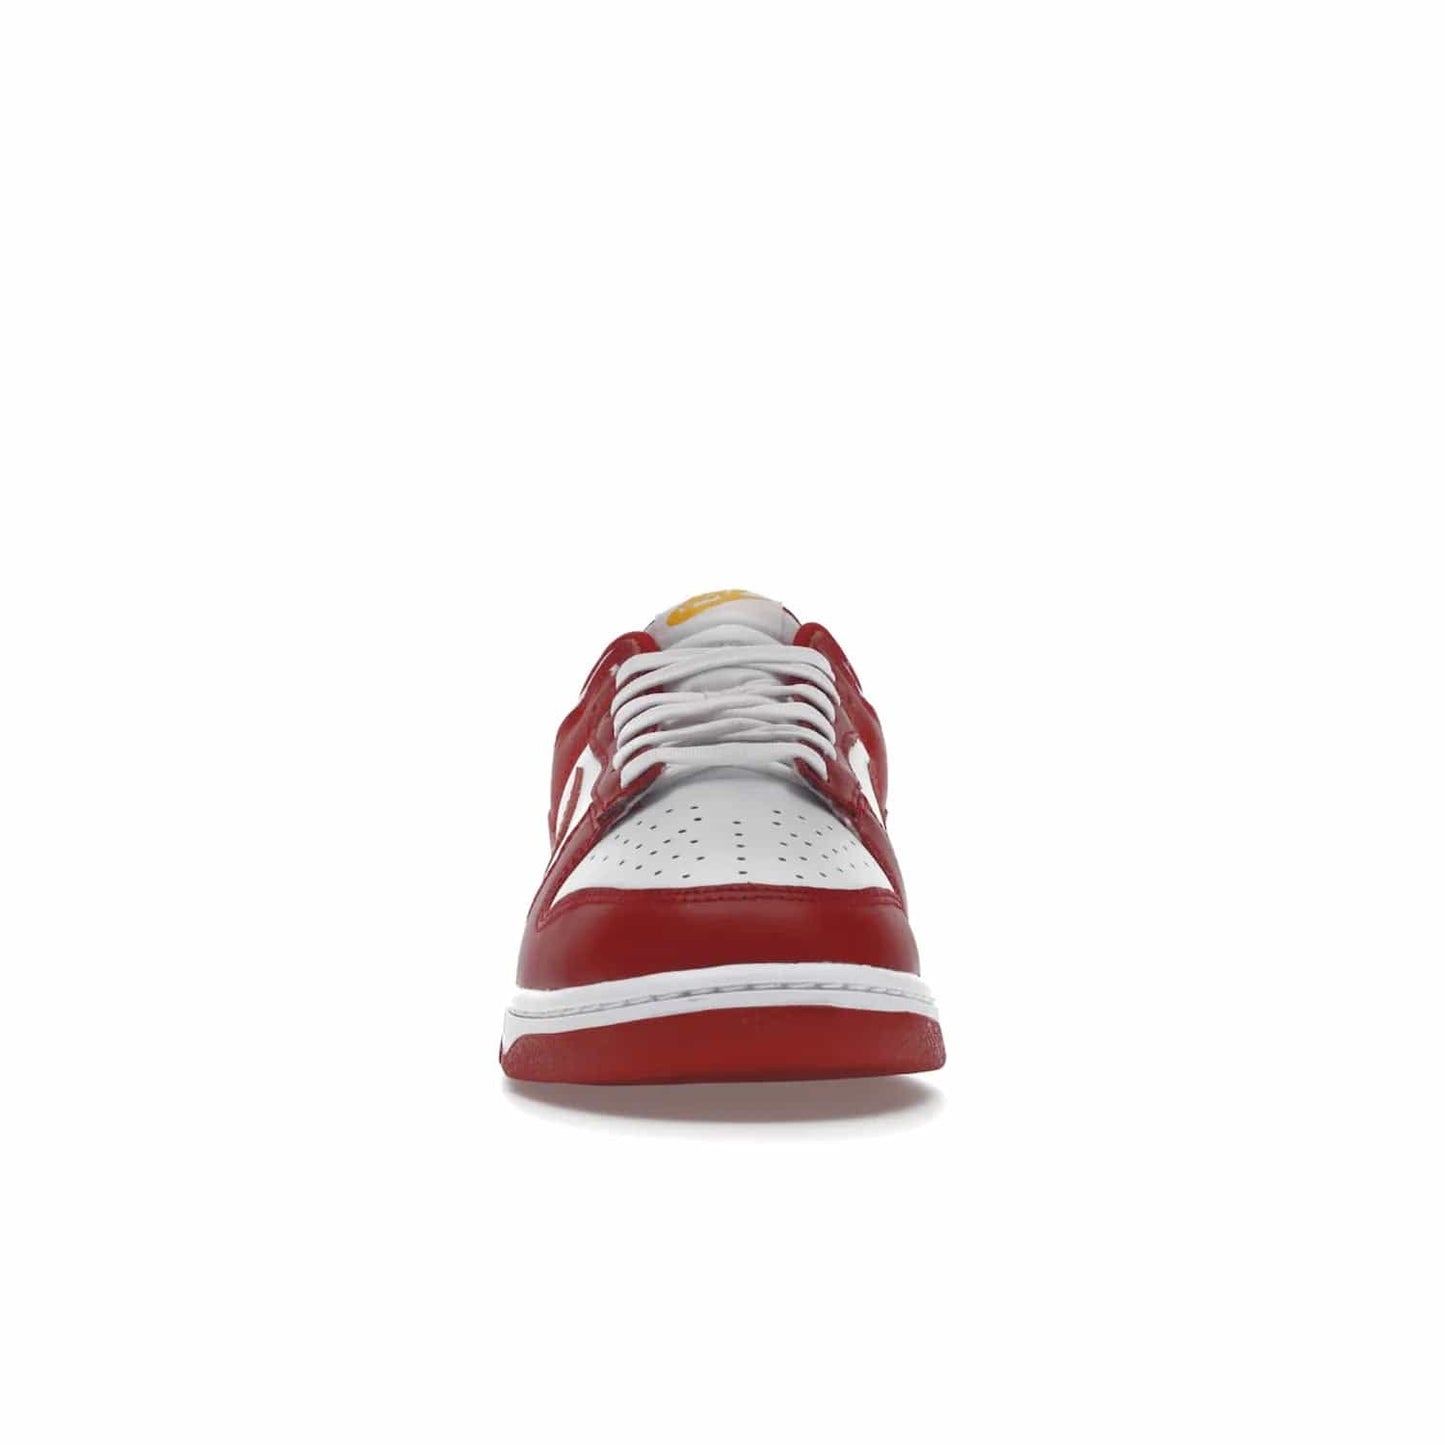 Nike Dunk Low USC - Image 10 - Only at www.BallersClubKickz.com - The Nike Dunk Low USC DD1391-602 colorway captures the eye of University of Southern California fans. Crafted with leather and rubber upper and outsole, this stylish sneaker features a white, gym red, and yellow colorway. With yellow Nike branding, white perforated vamp, and red suede Swoosh, this sneaker turns heads. Get the classic Nike Dunk Low USC releasing on November 9th, 2022.